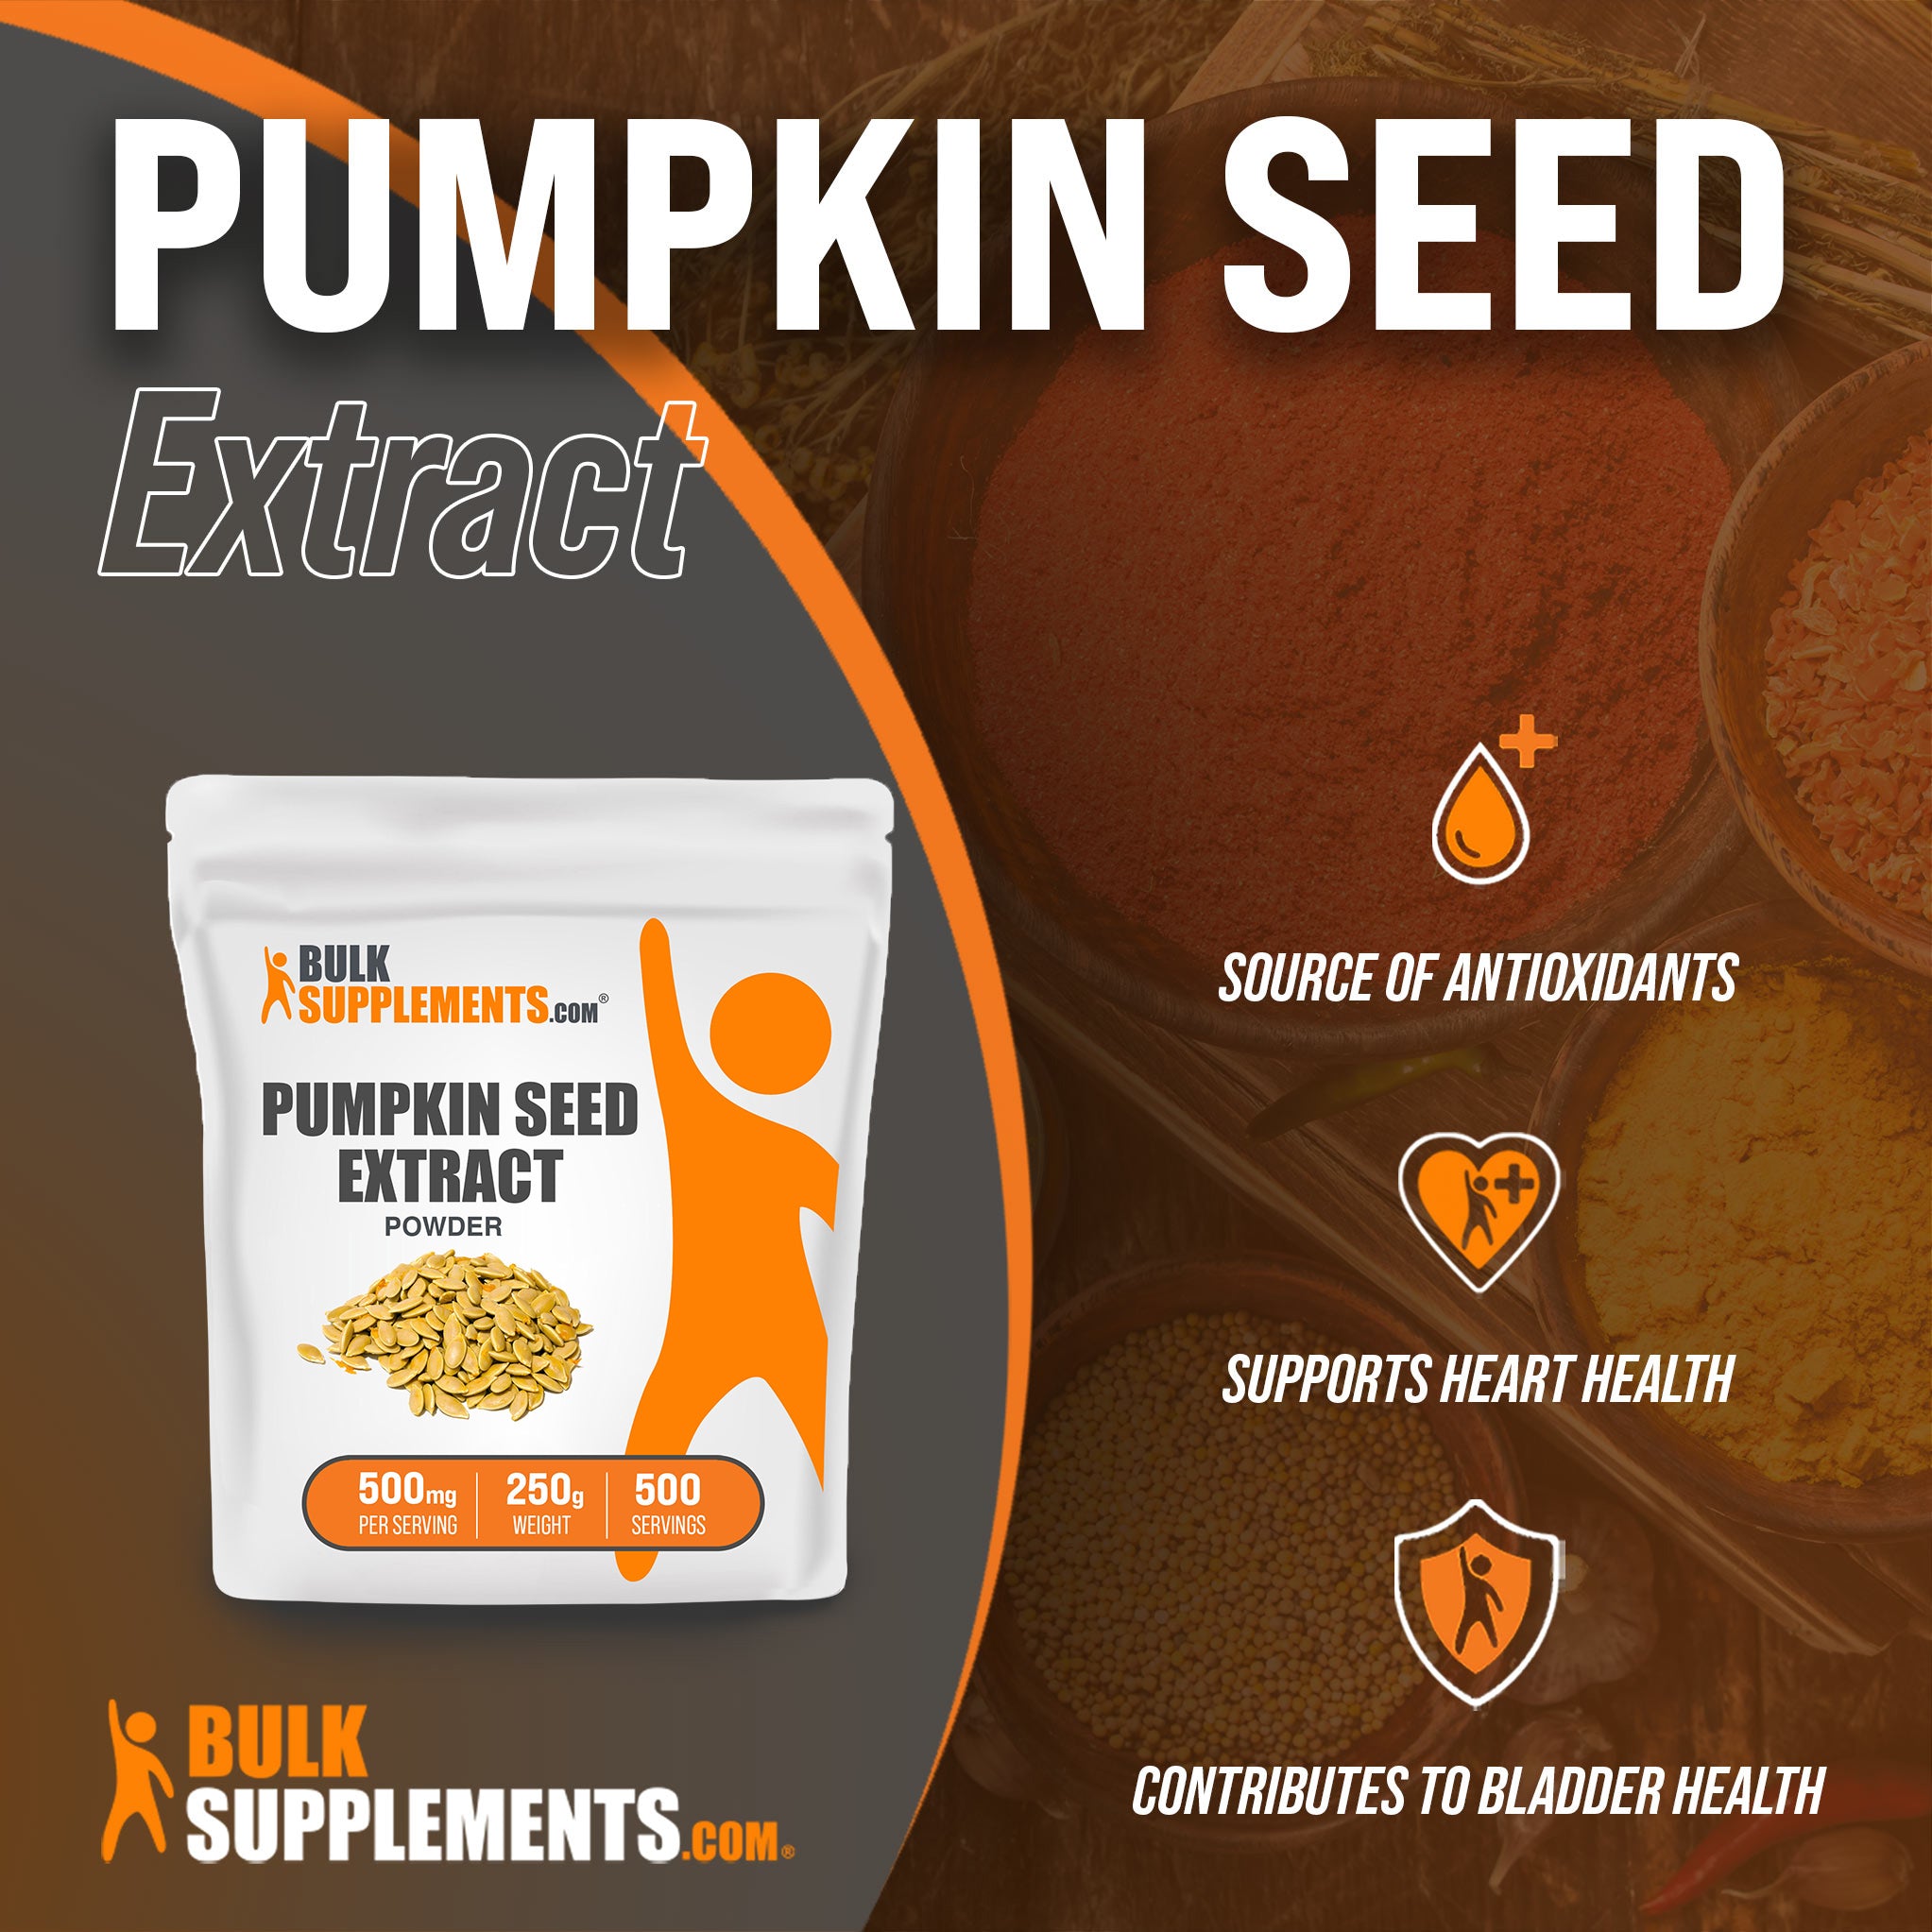 Benefits of Pumpkin Seed Extract: source of antioxidants, supports heart health, contributes to bladder health